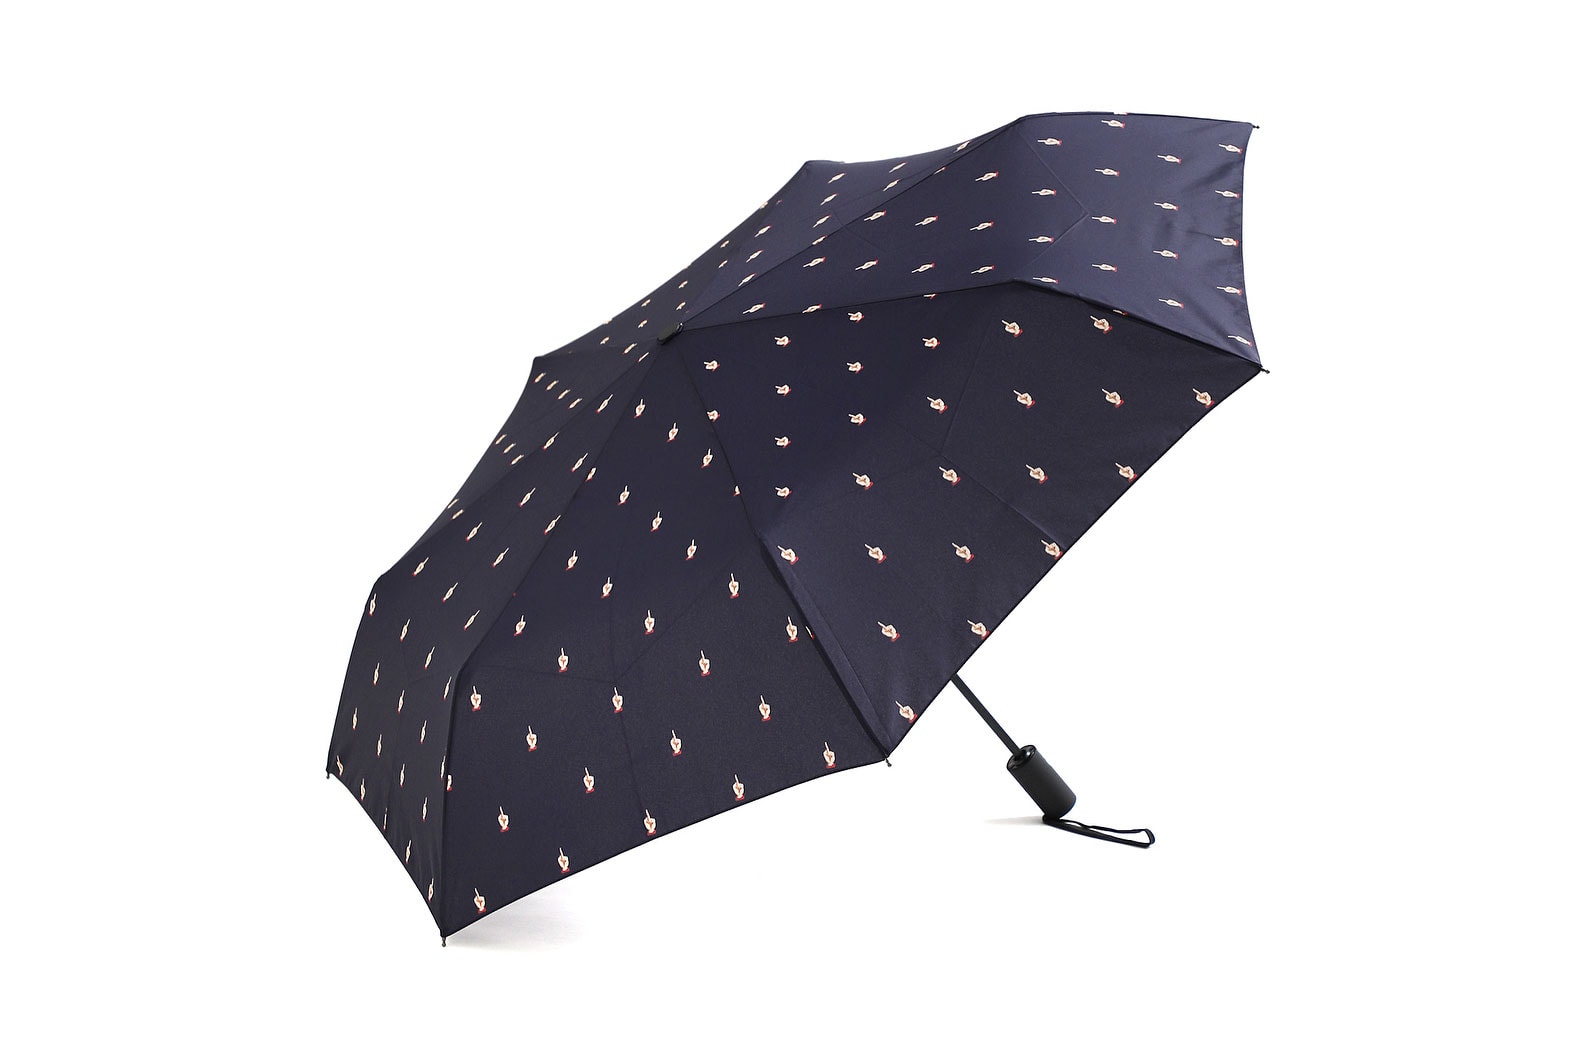 undercover kiu collaboration july 21 2018 printed umbrellas navy blue white middle finger graphic zipper pocket